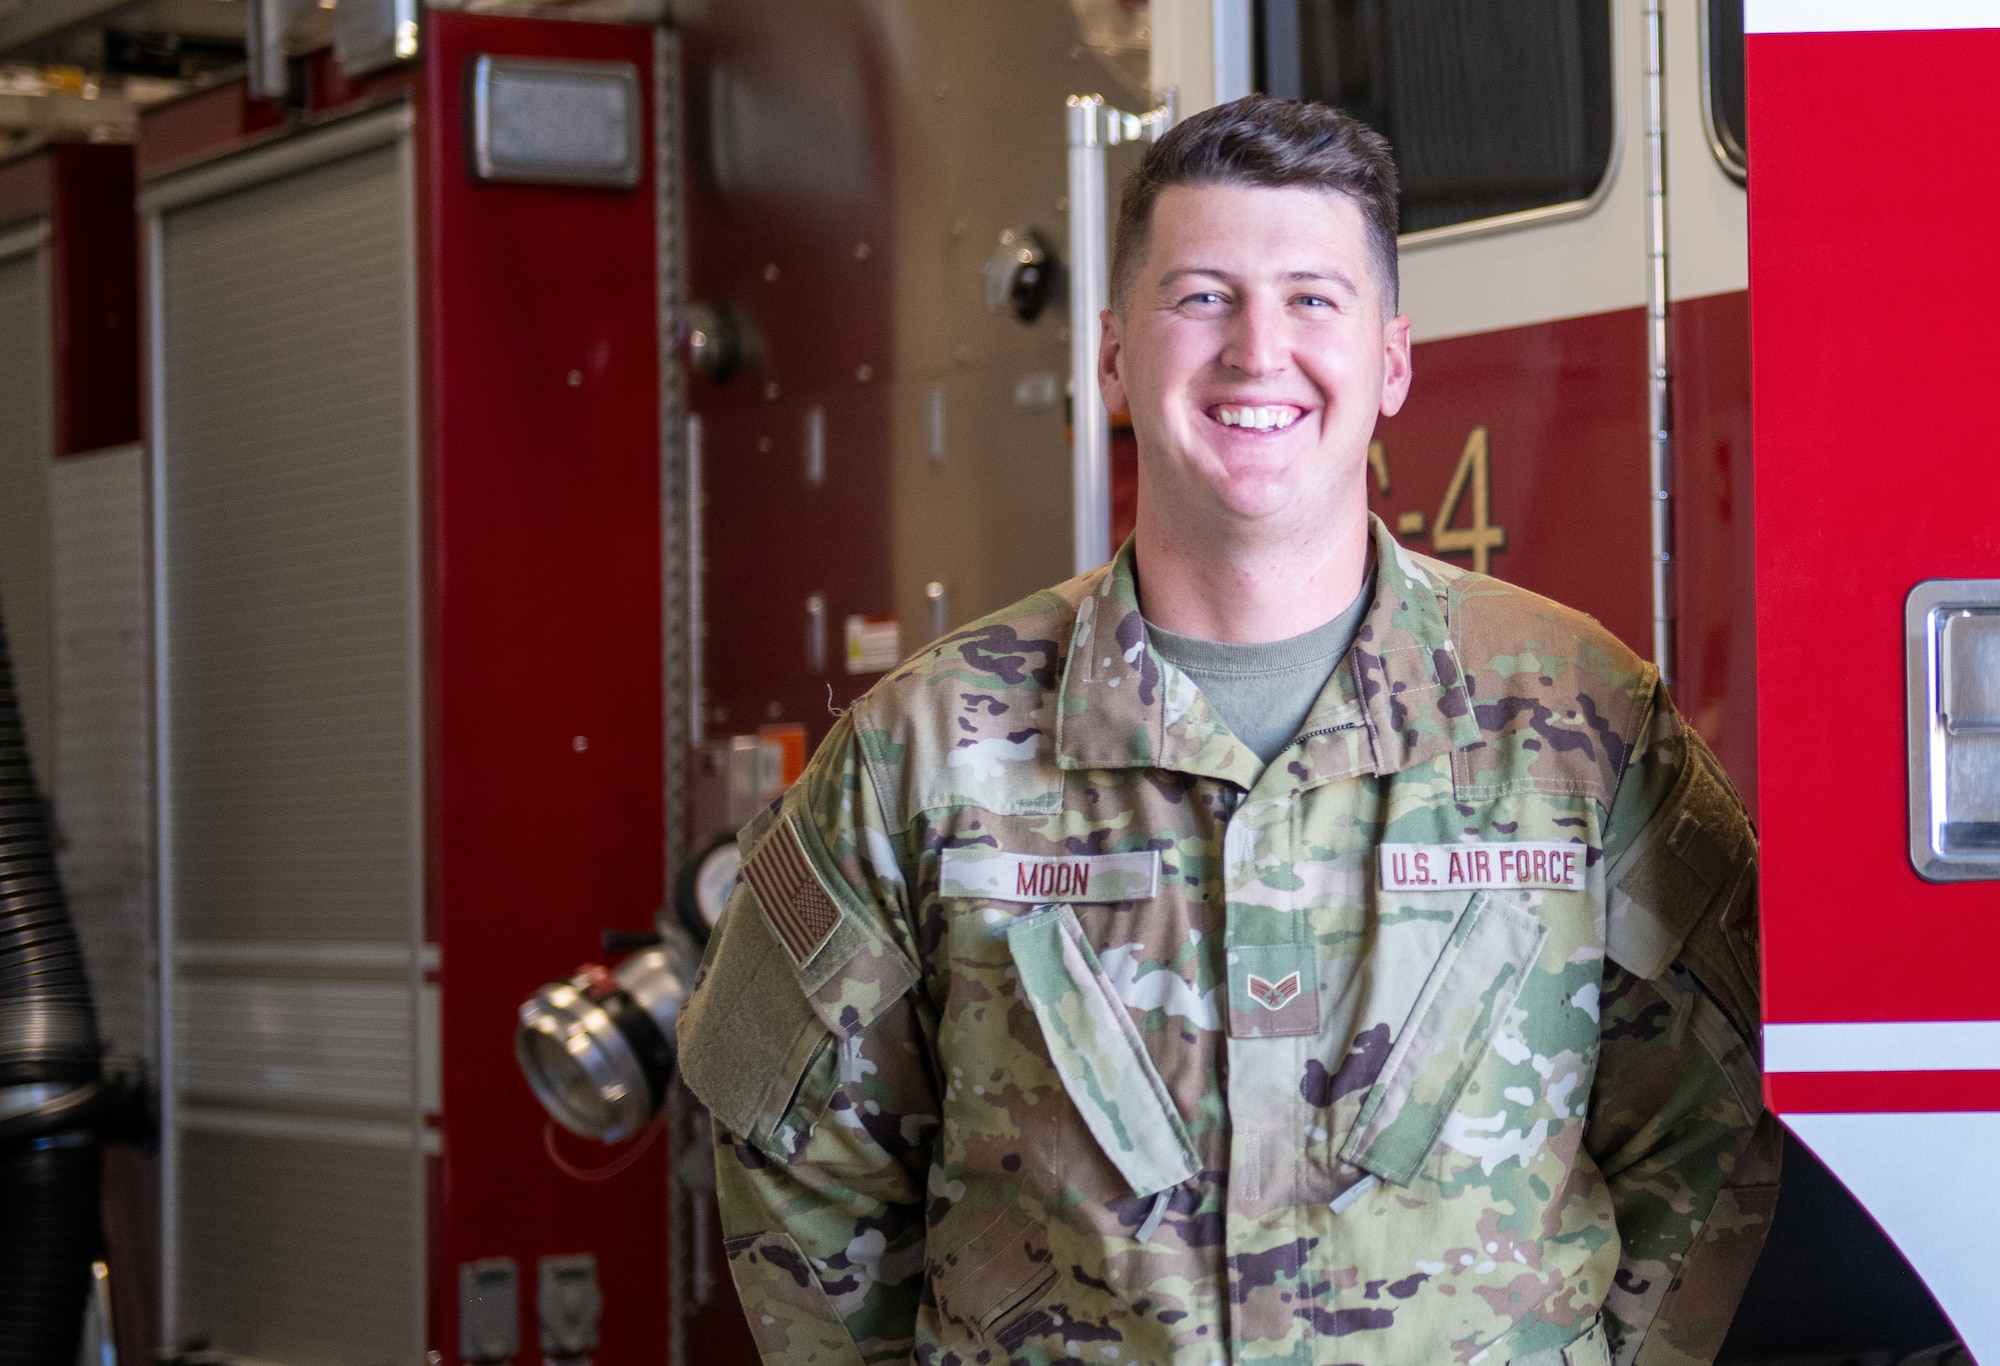 U.S. Air Force Senior Airman Jared Moon, firefighter with the 419th Civil Engineer Squadron, poses for a photo at Hill Air Force Base, Utah on Oct. 3, 2021.